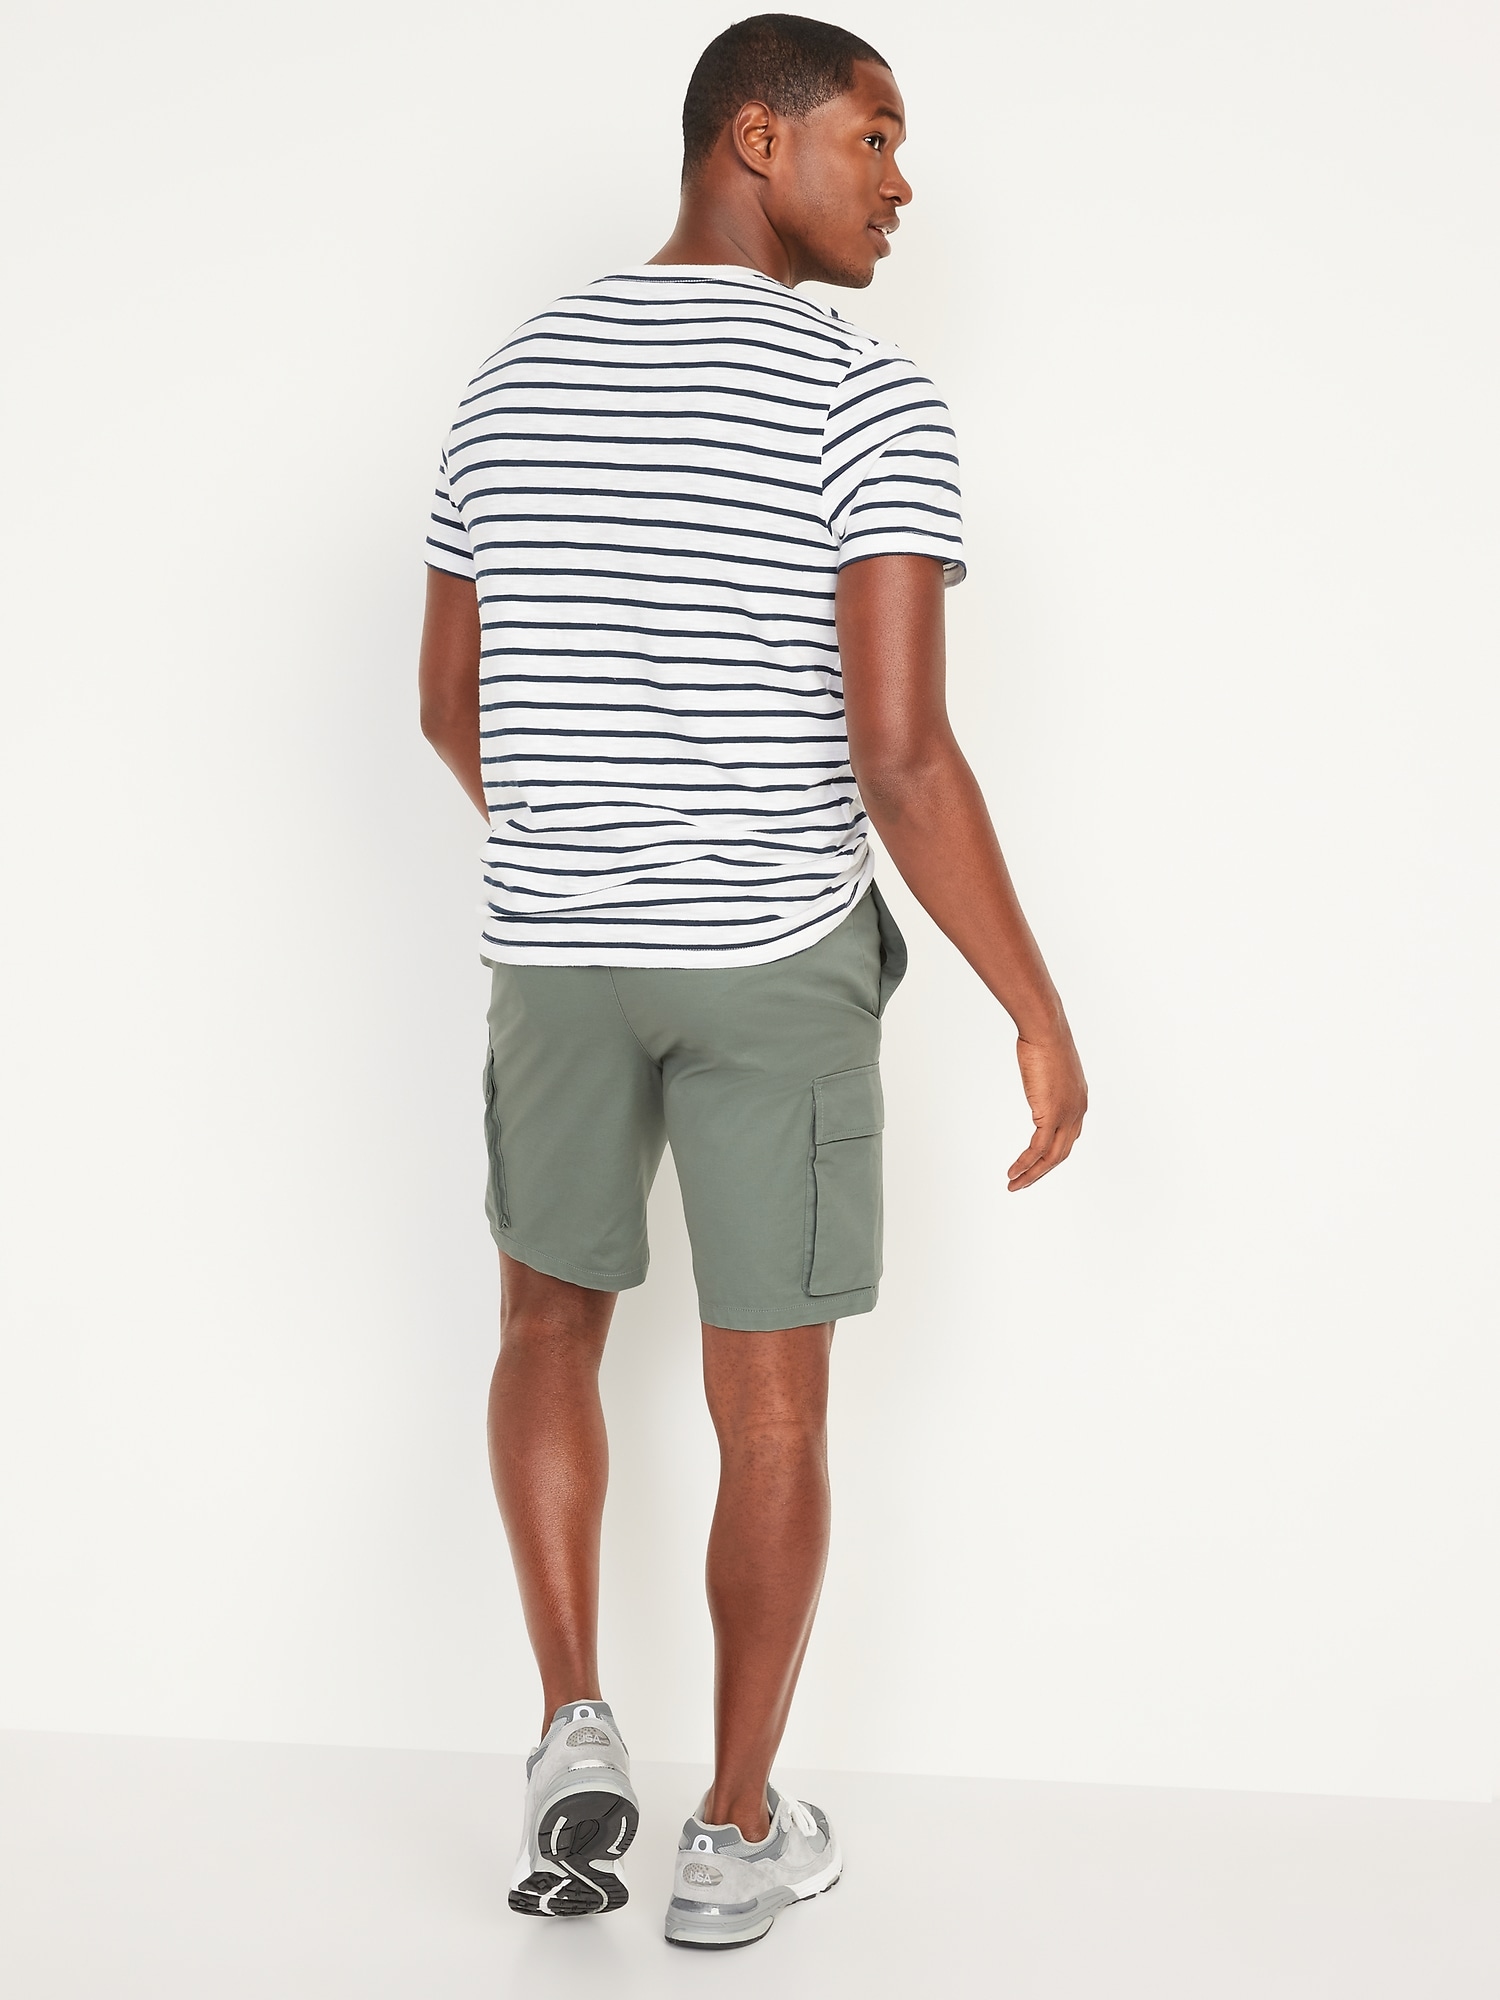 Slim Ultimate Tech Cargo Shorts for Men -- 9-inch inseam | Old Navy